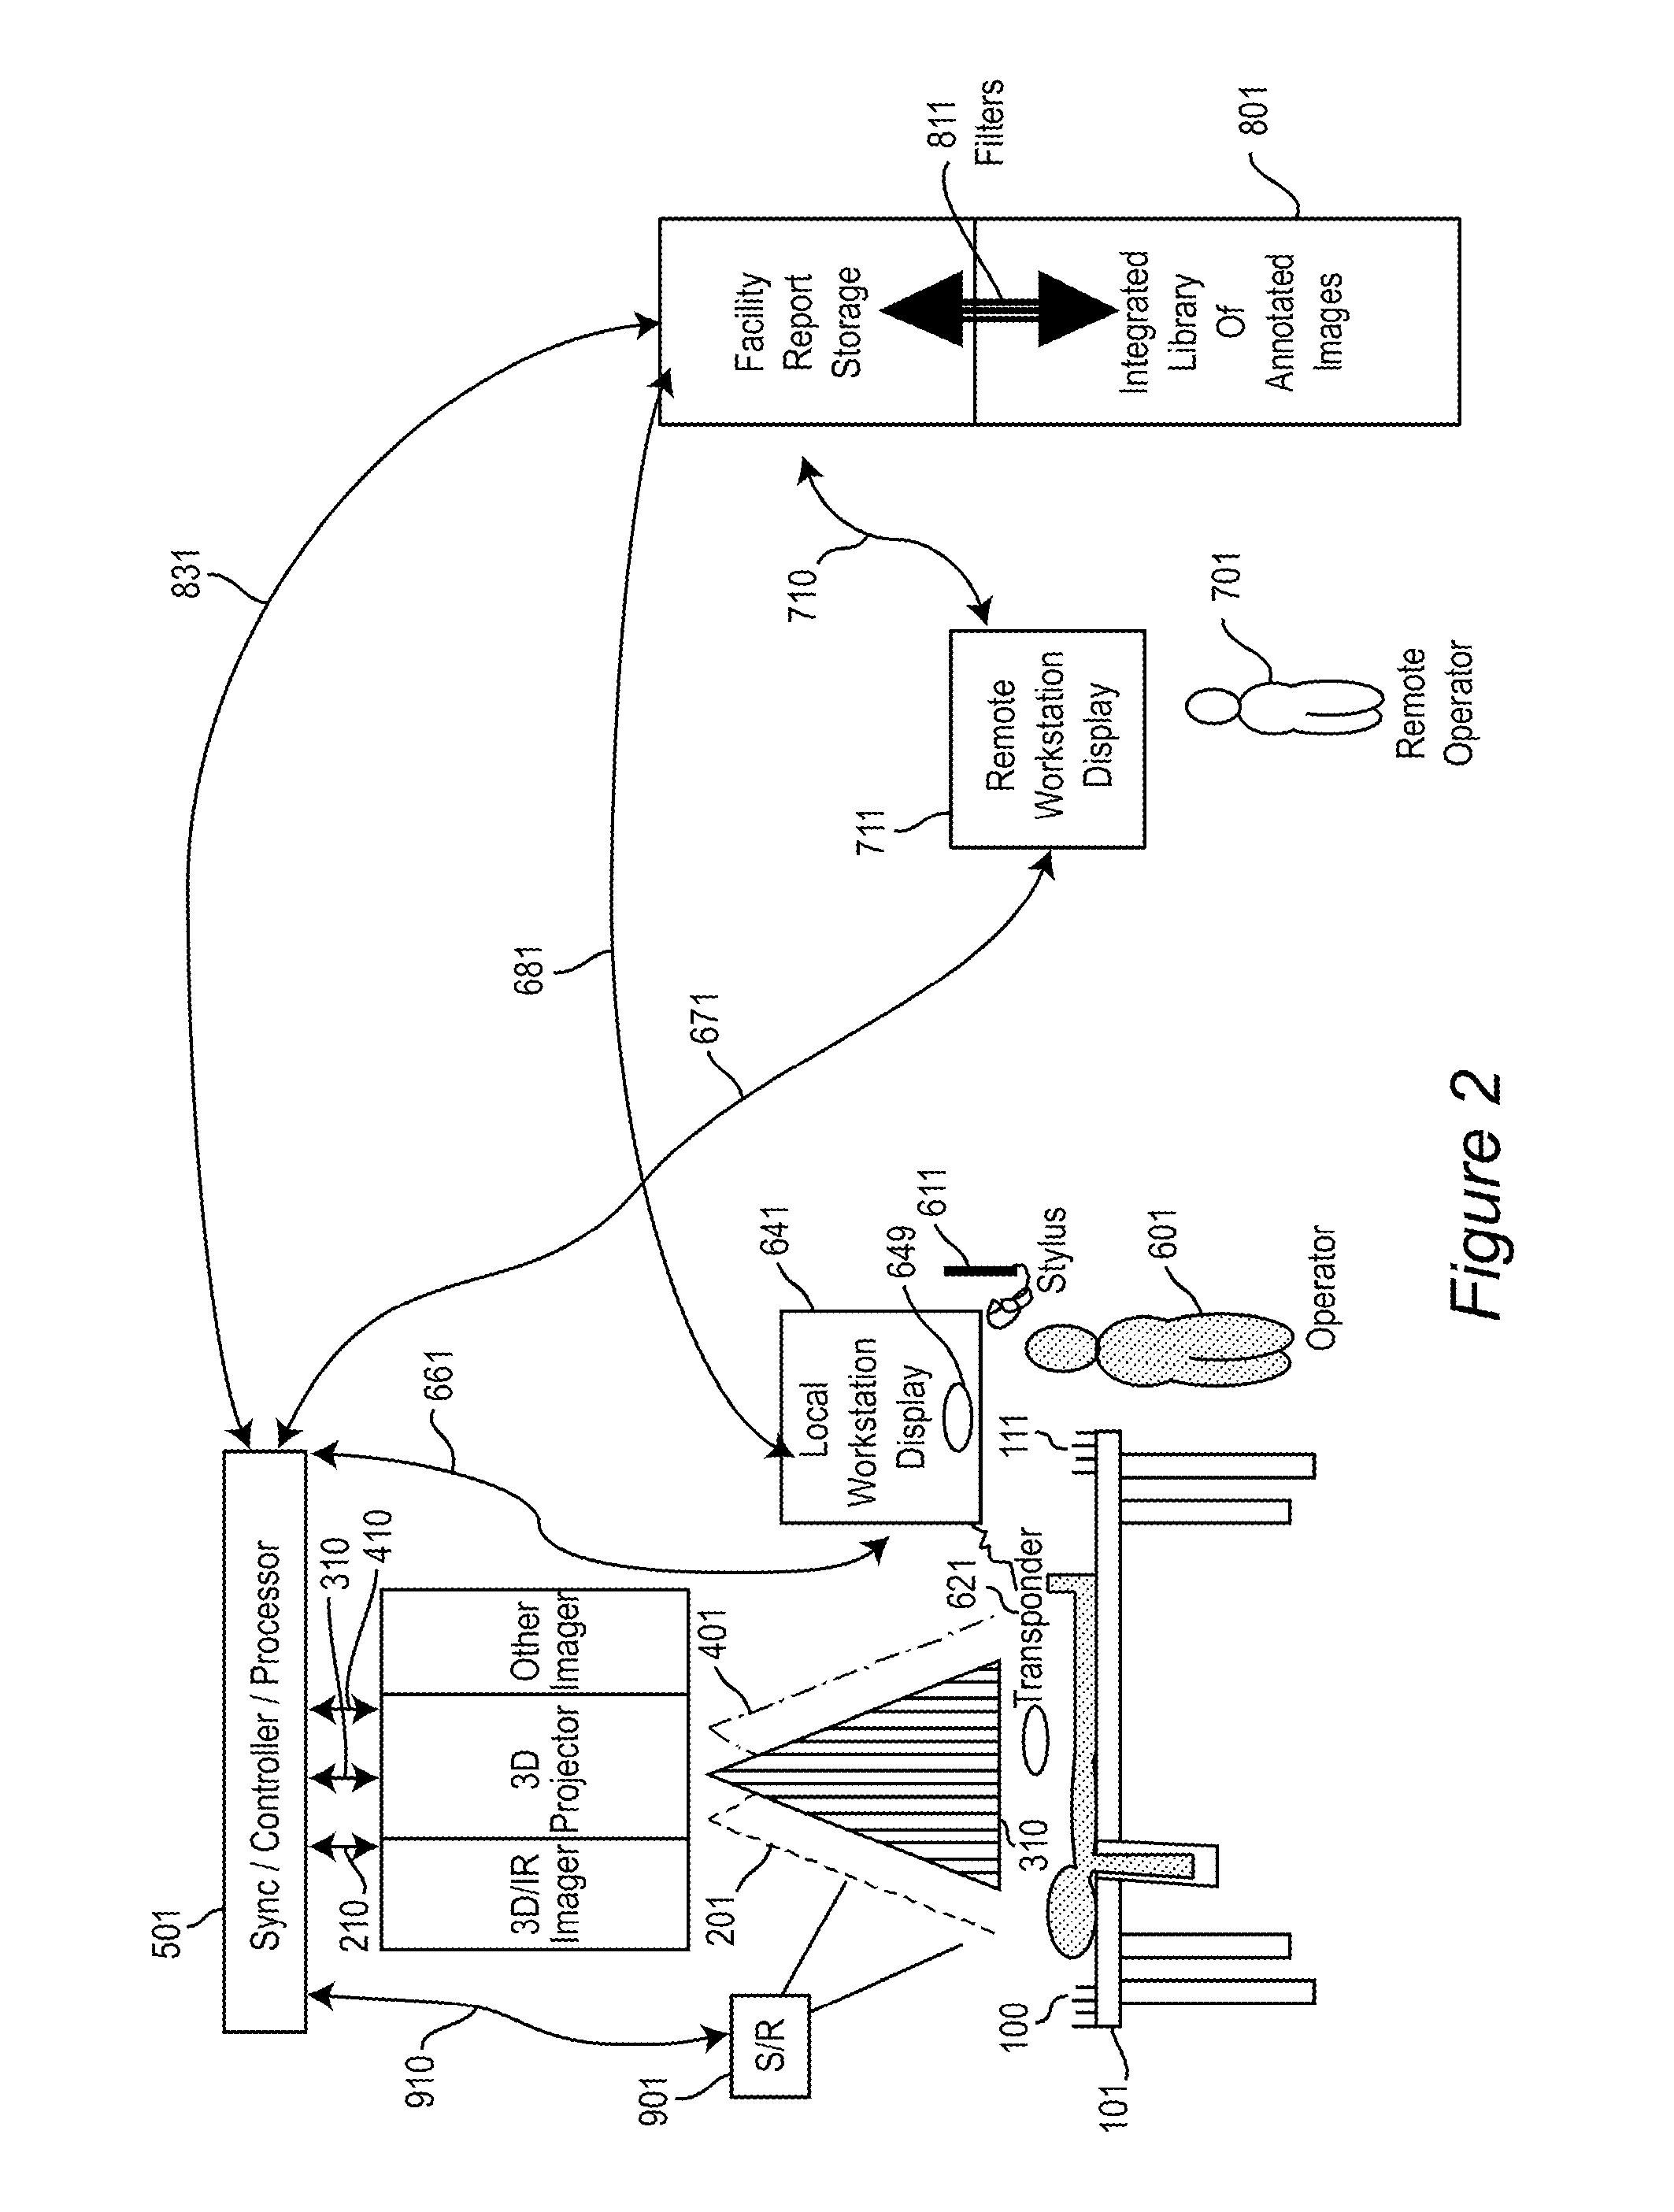 System and method for using three dimensional infrared imaging to identify individuals